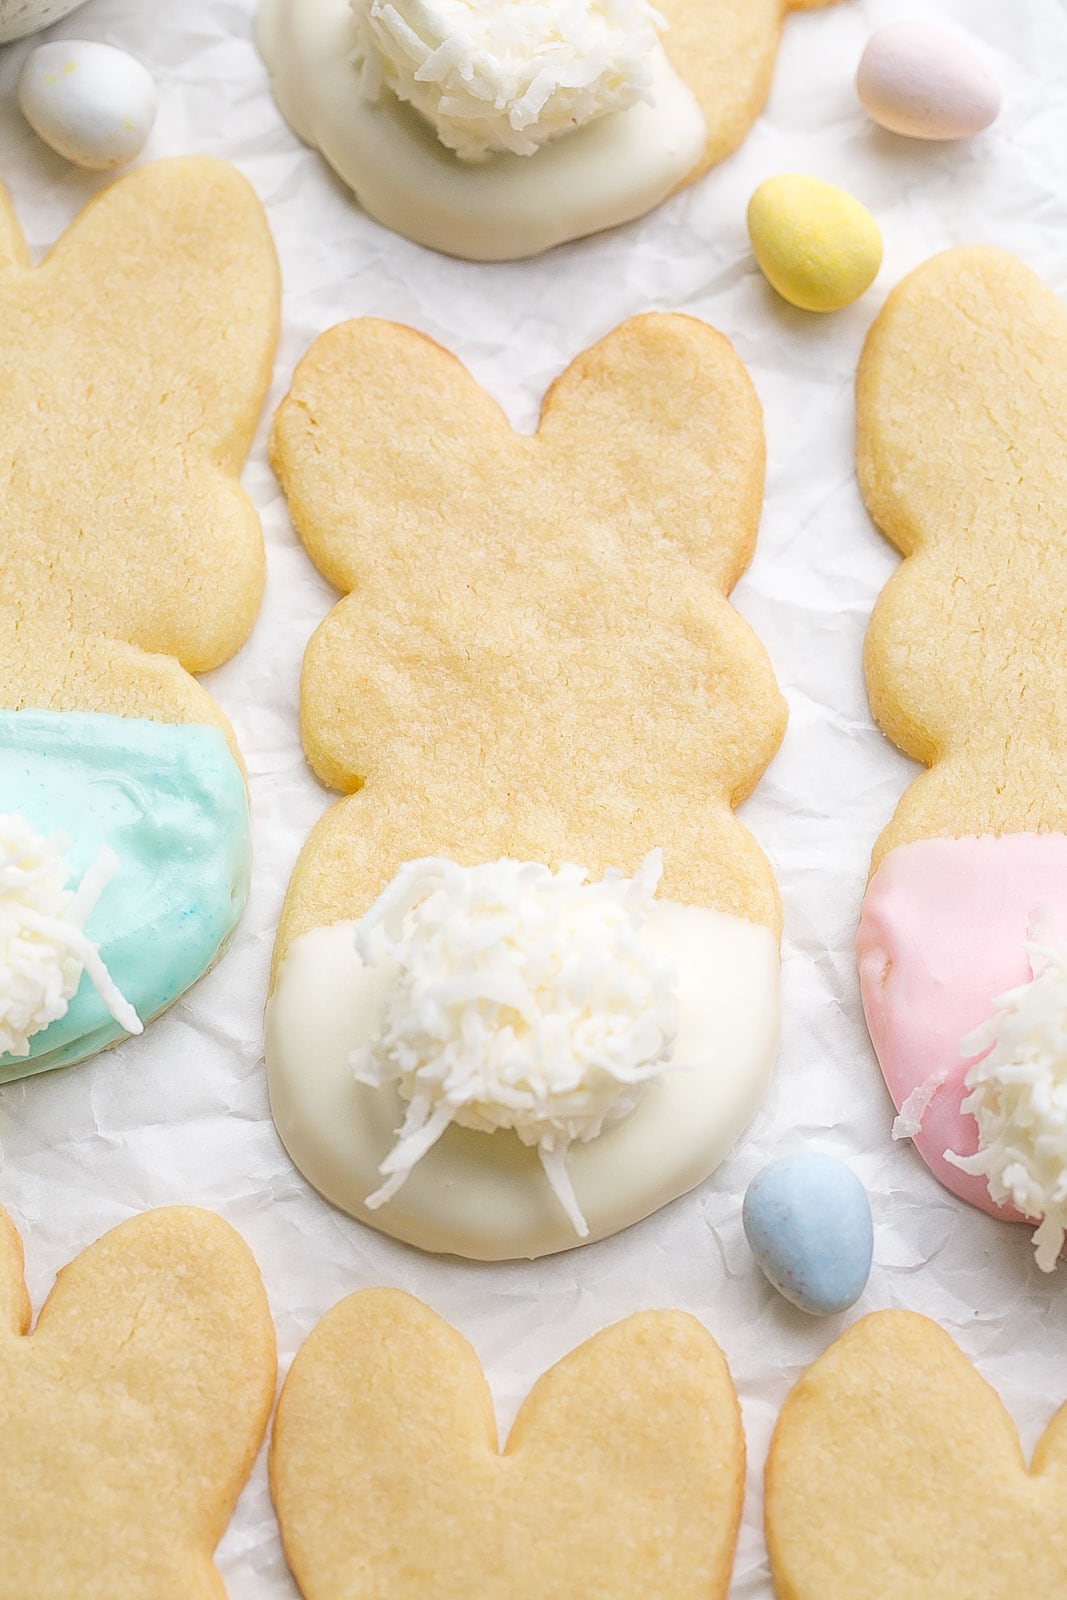 Sugar cookies with bunny tails.